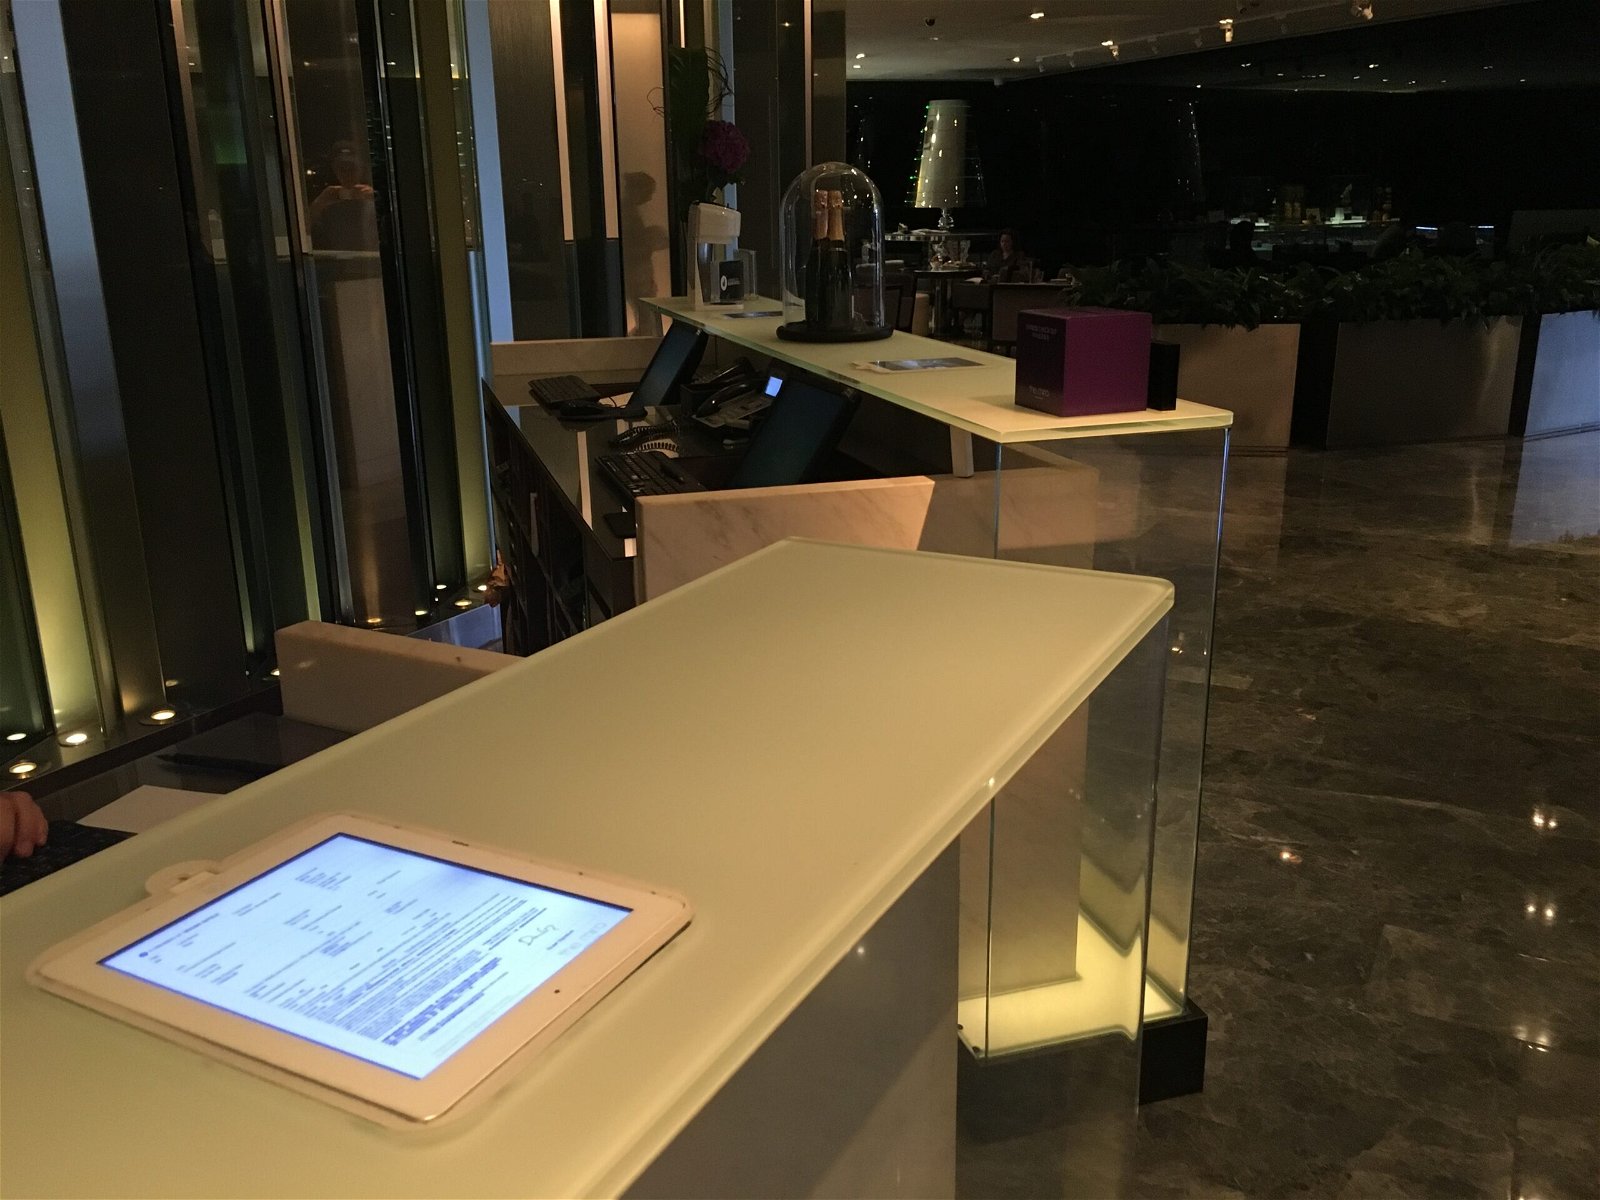 The check-in desks had built in iPads!